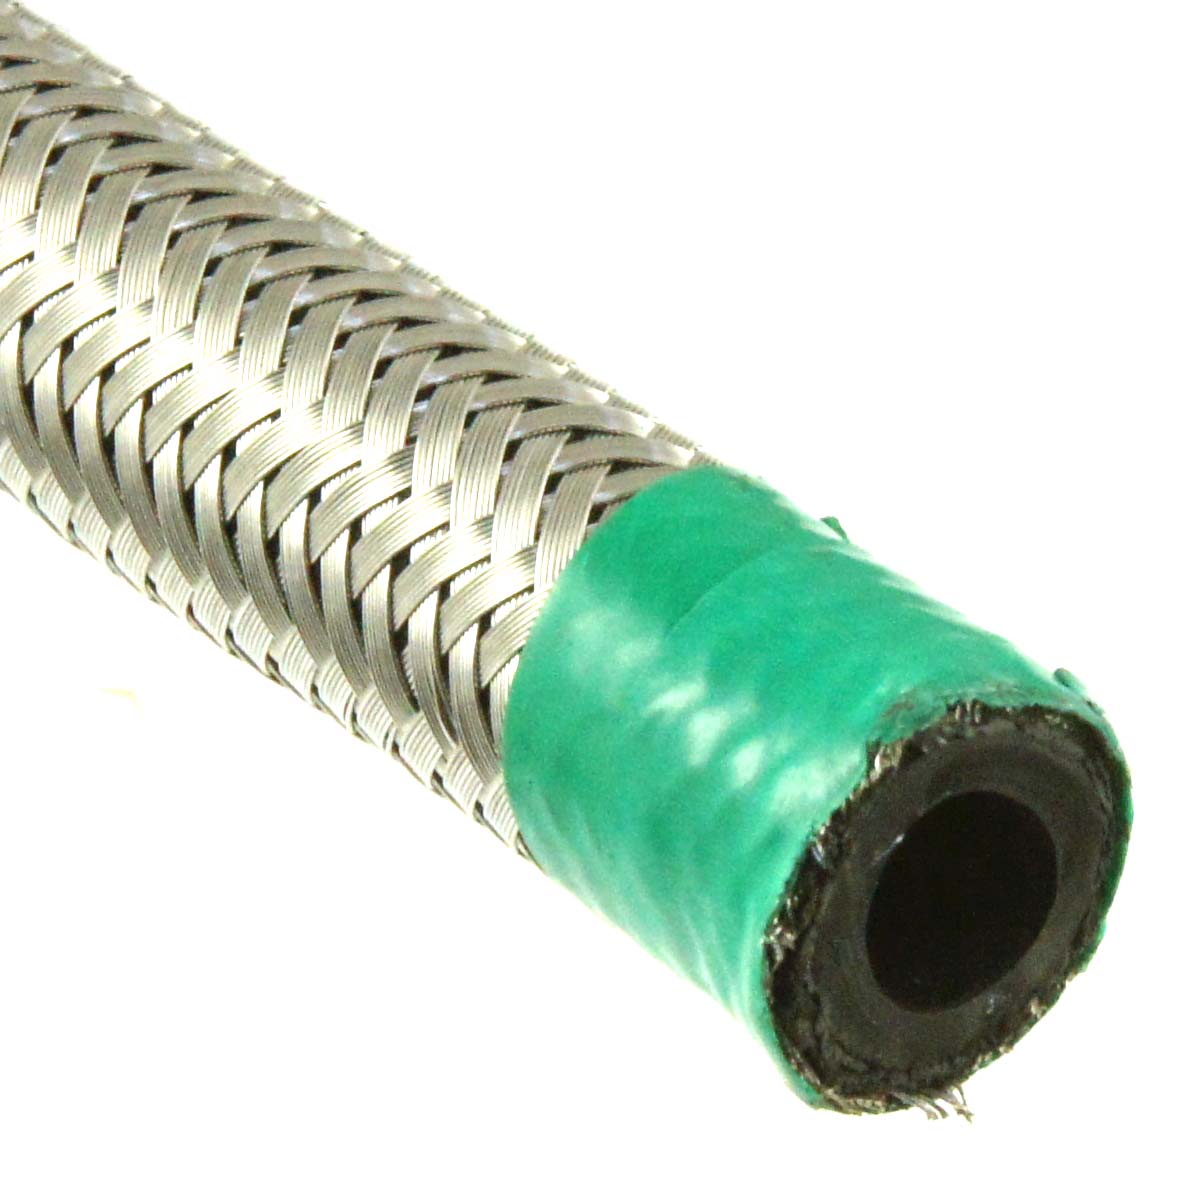 https://www.carbuilder.com/images/thumbs/001/0017577_stainless-steel-braided-fuel-hose-8mm-per-metre.jpeg